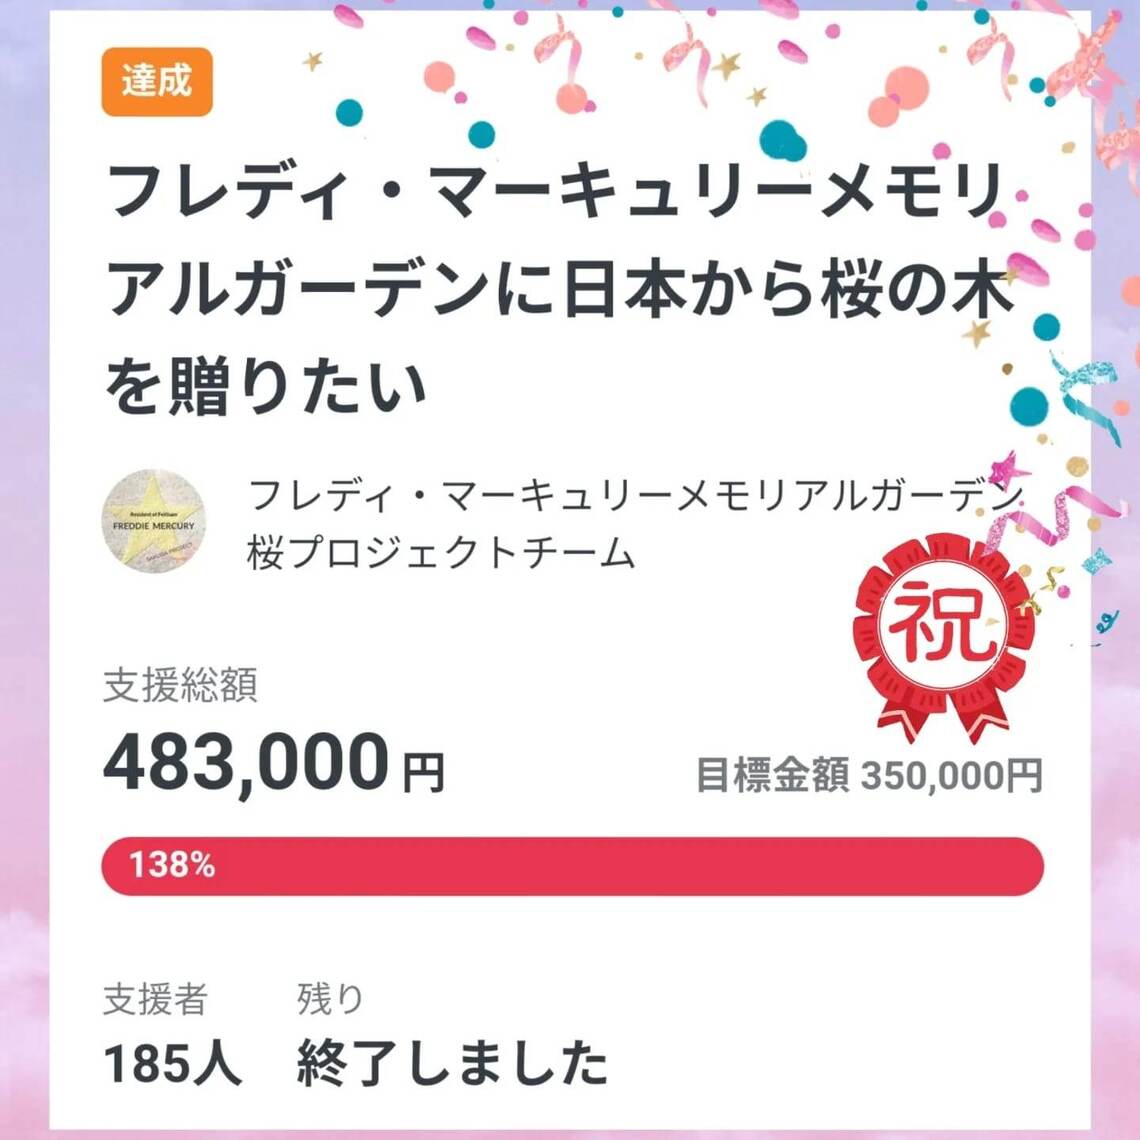 Japanese Cherry tree results campaign